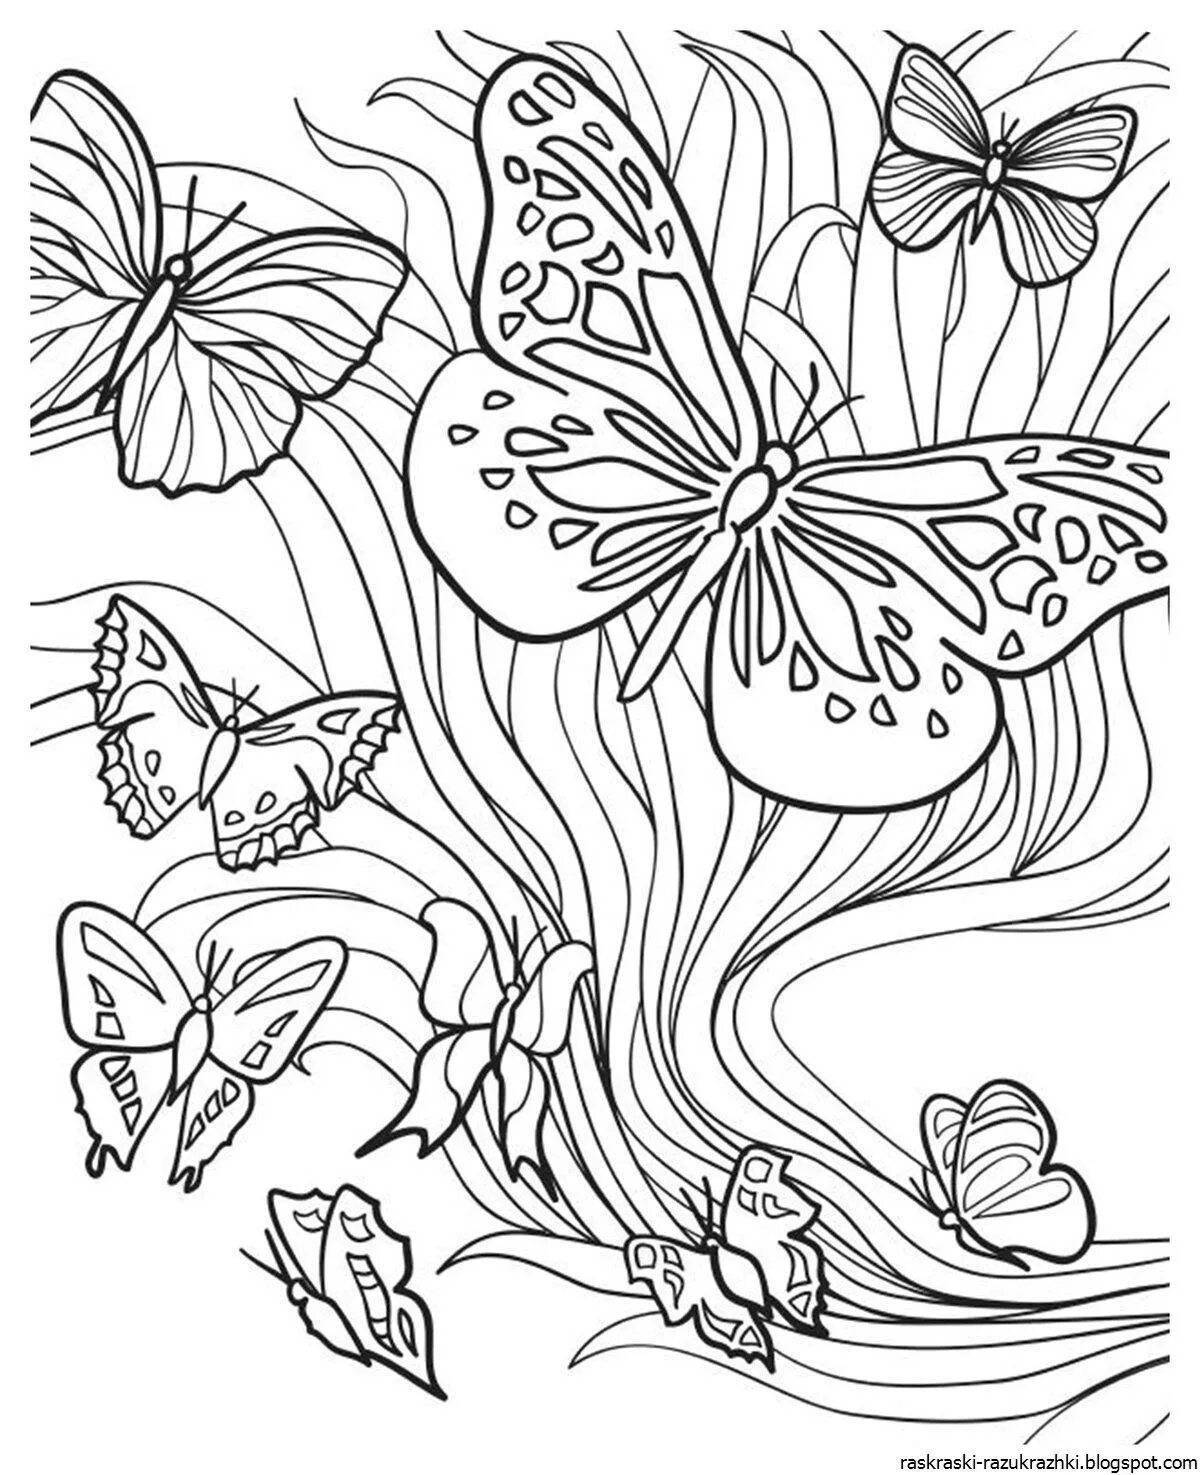 Brilliant beauty coloring pages